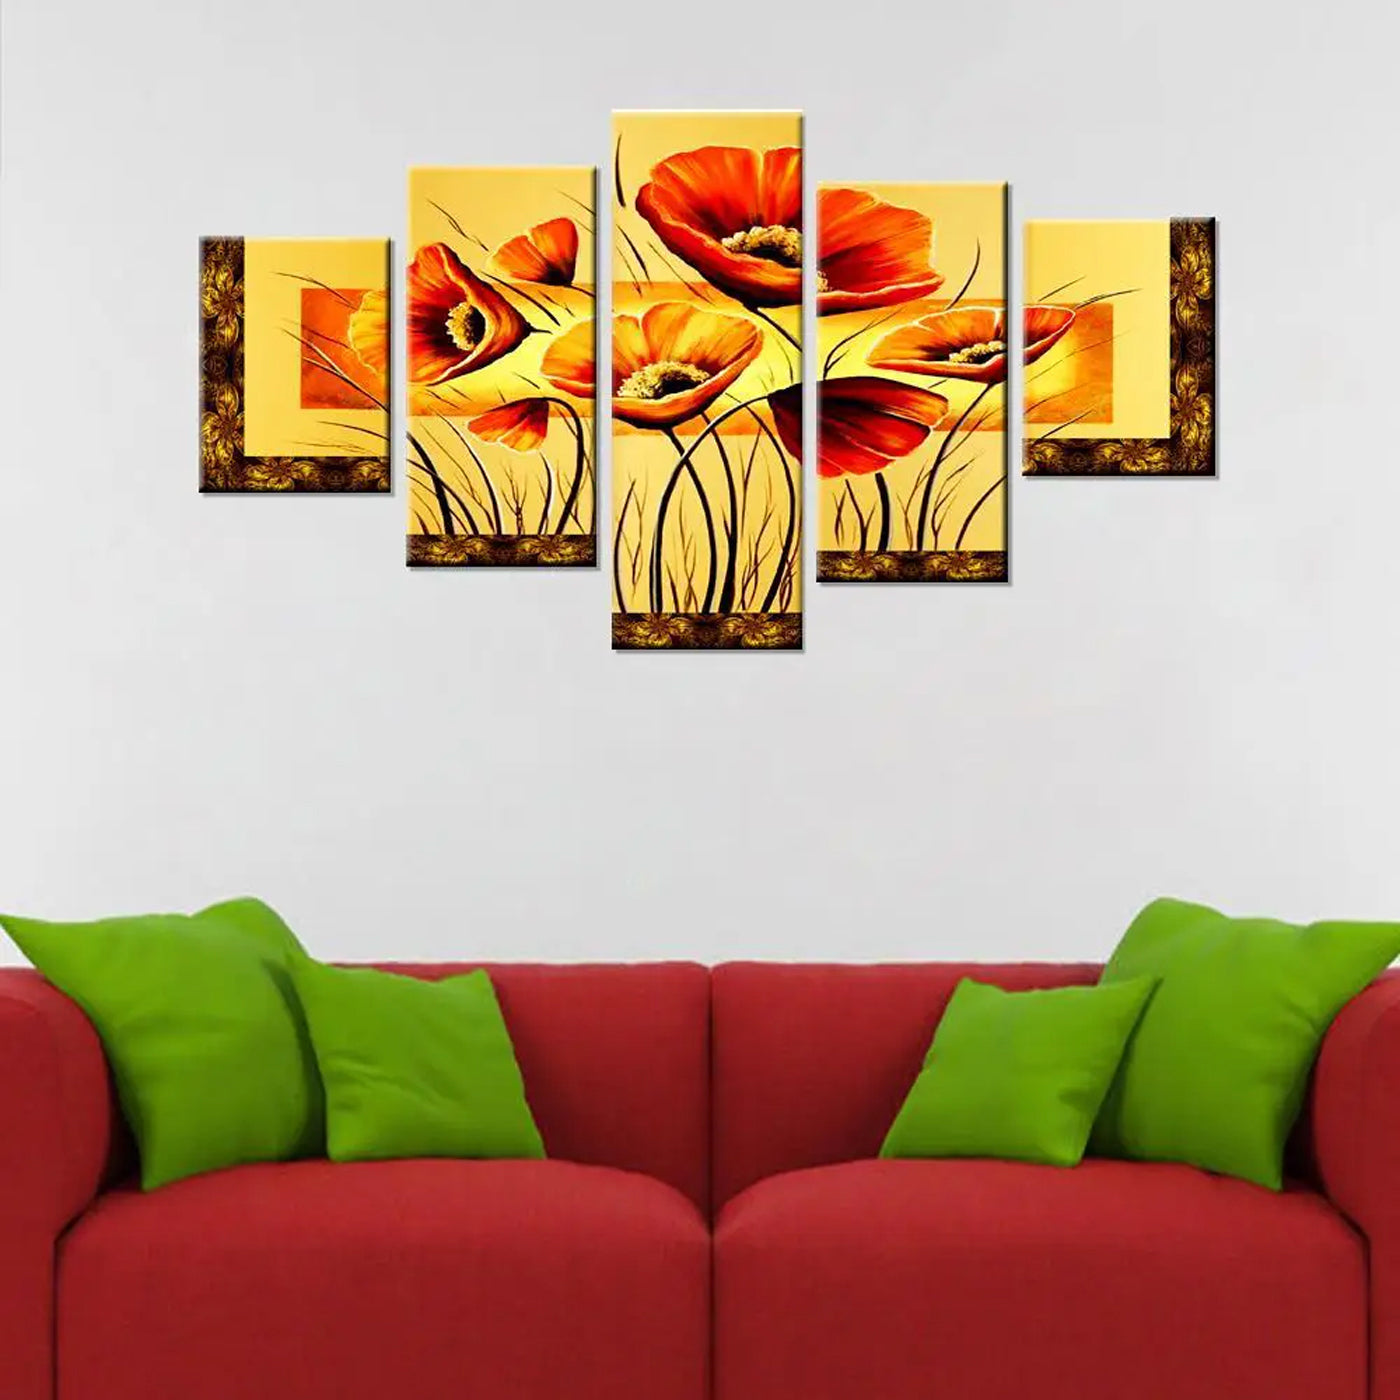 golden hour glamour | flowers of freshness | canvas painting